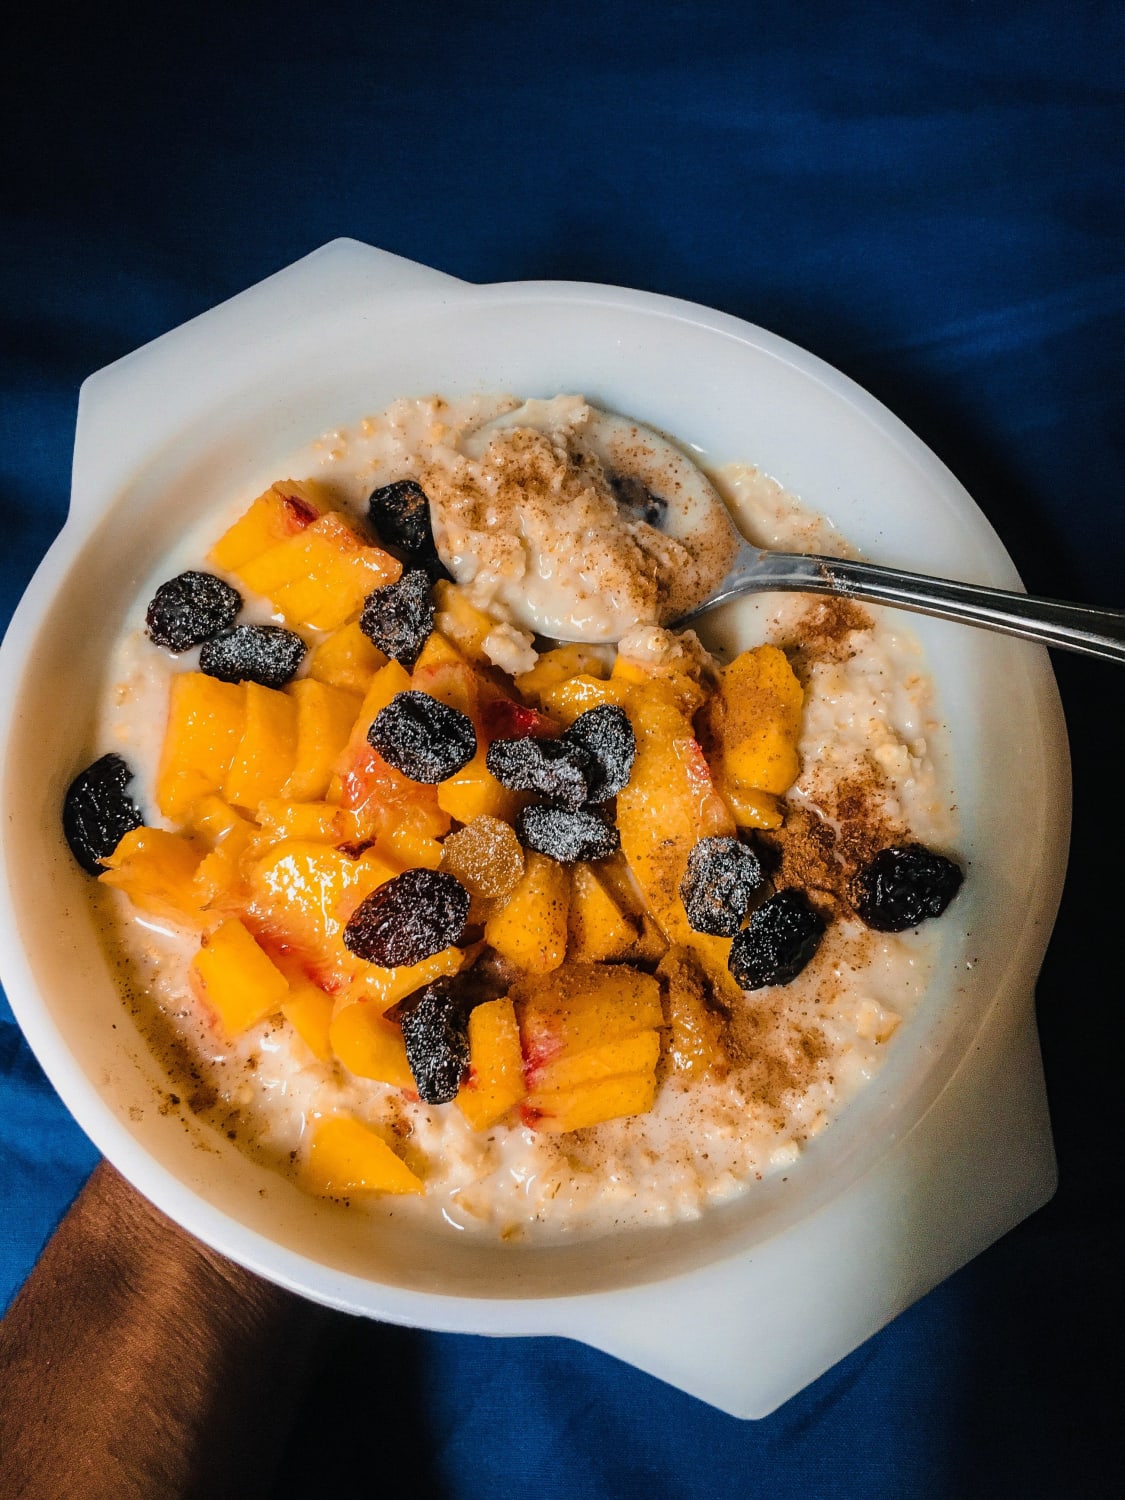 Oatmeal cooked with soy milk, nutmeg & cinnamon, topped off with raisins and a peach. sooo good. You guys have got to try this one out